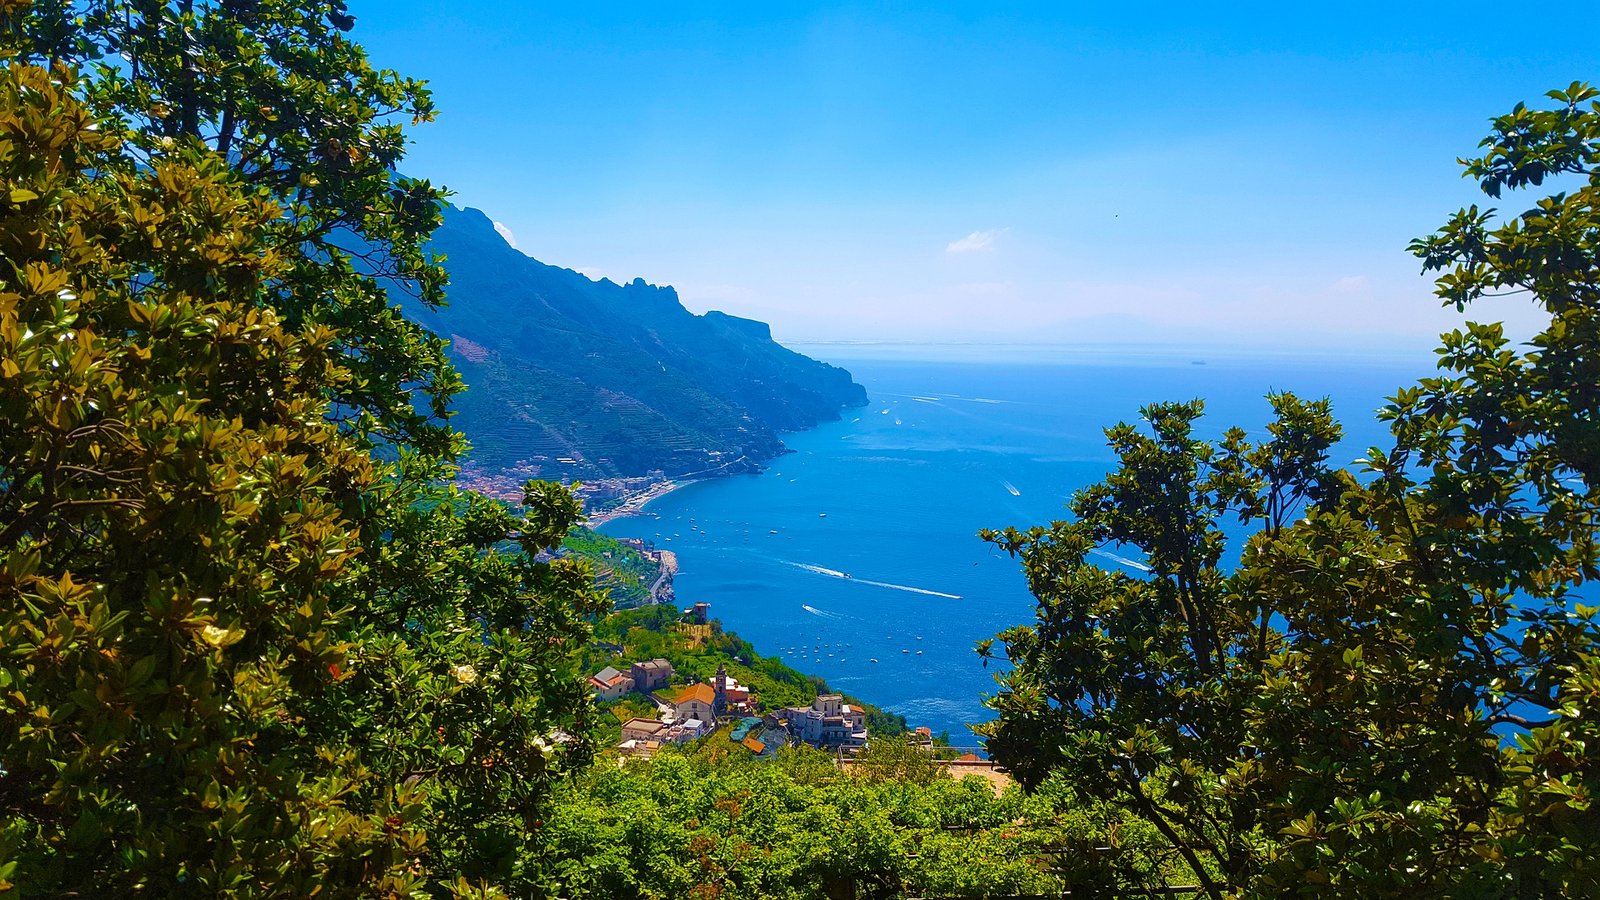 Services to expect from best private transfer from Naples to Positano